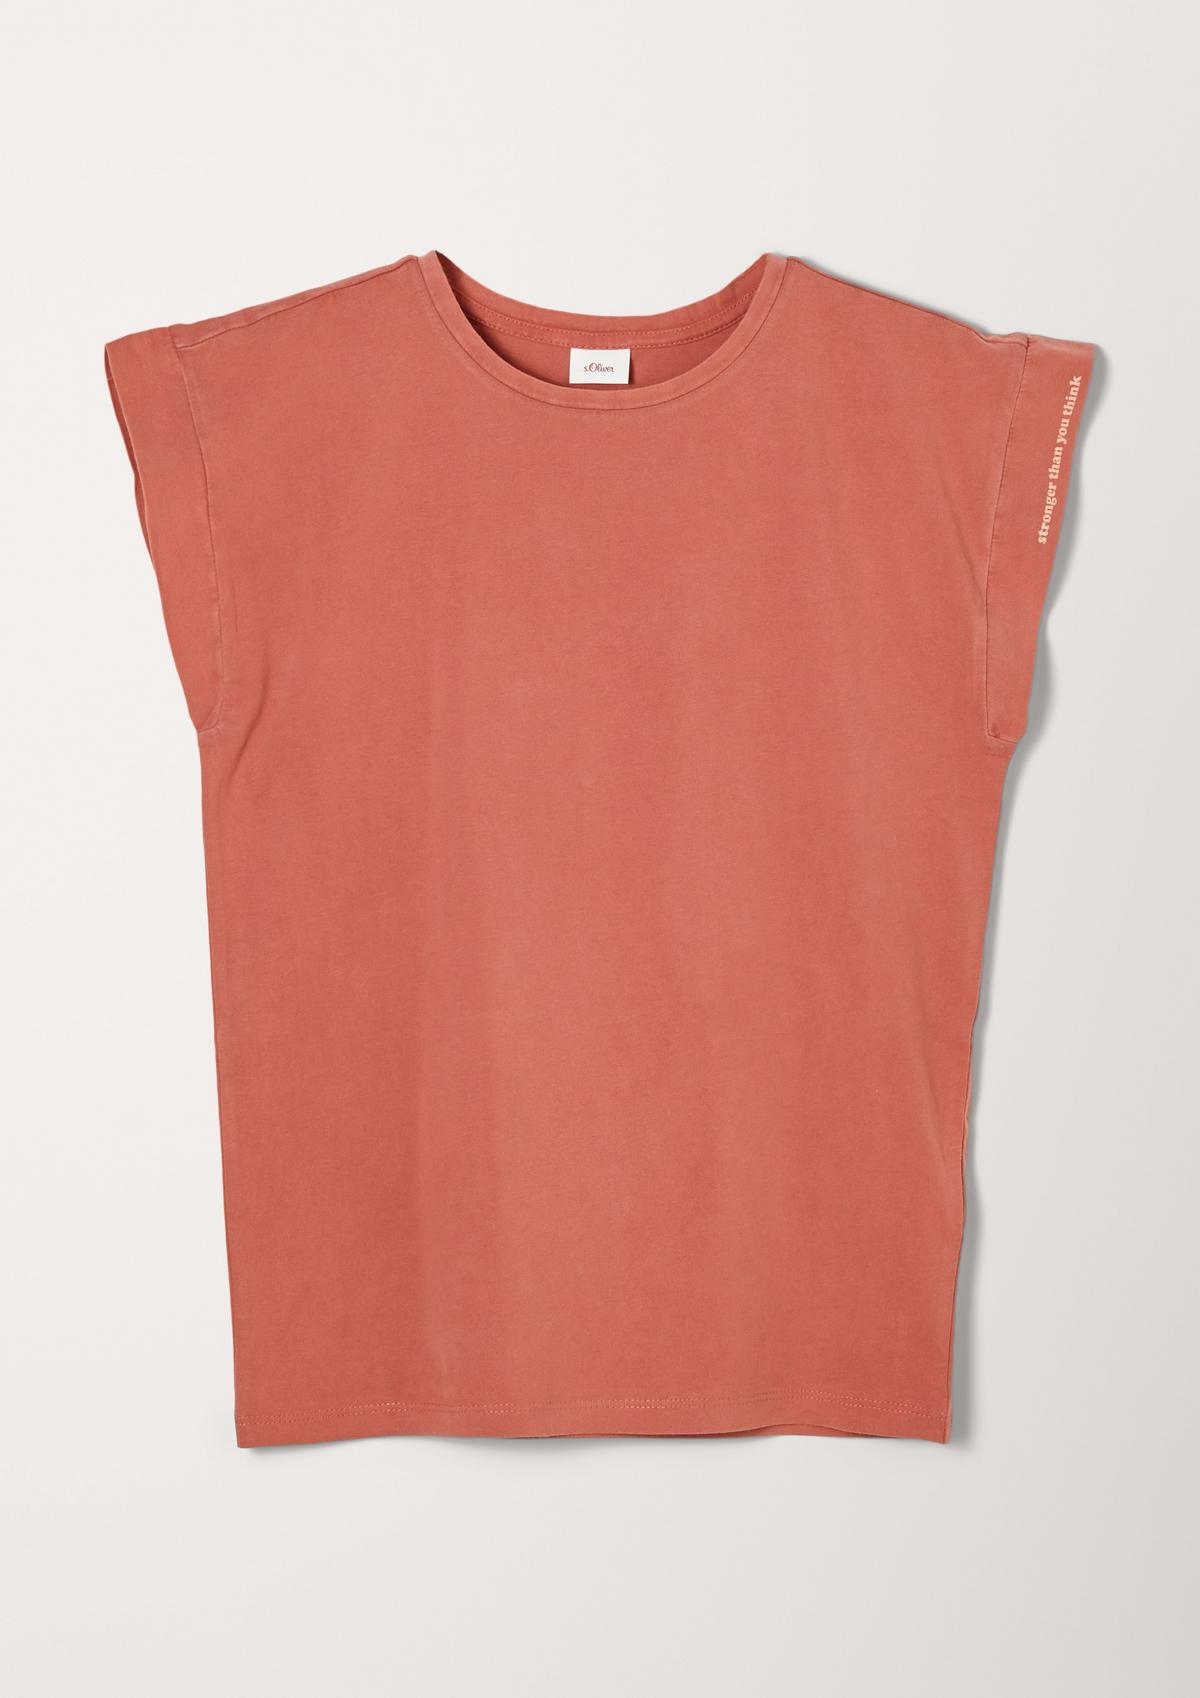 s.Oliver T-shirt with a garment-washed effect